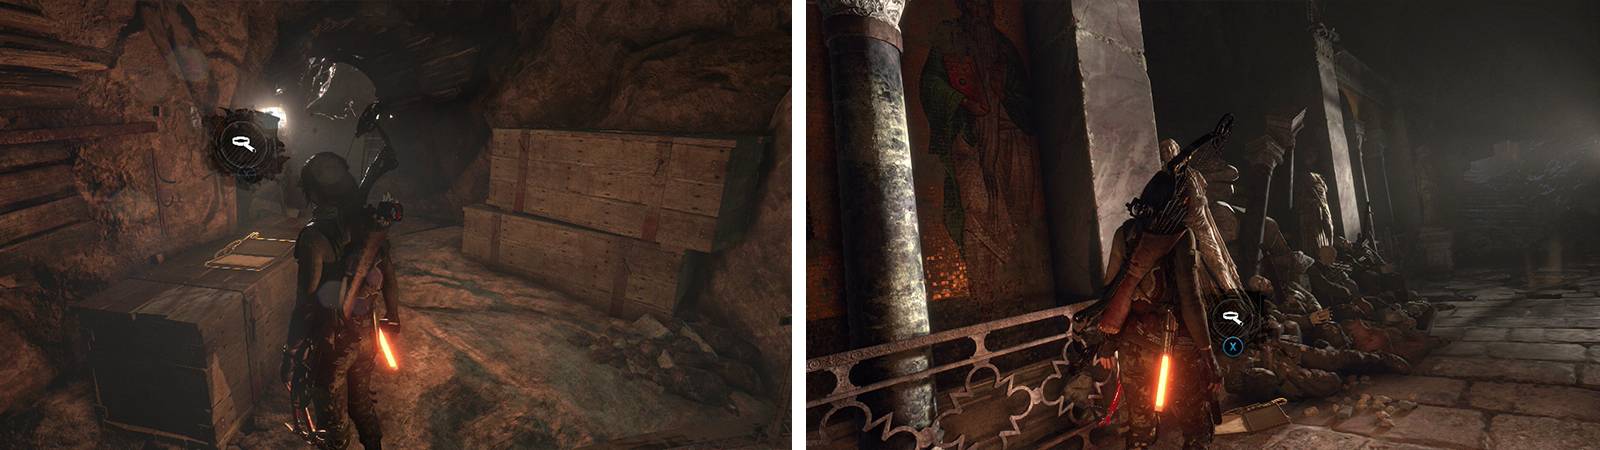 At the top of the first room you’ll find Document 01 (left). When you reached the paved area, Document 02 can be found along the left wall (right).